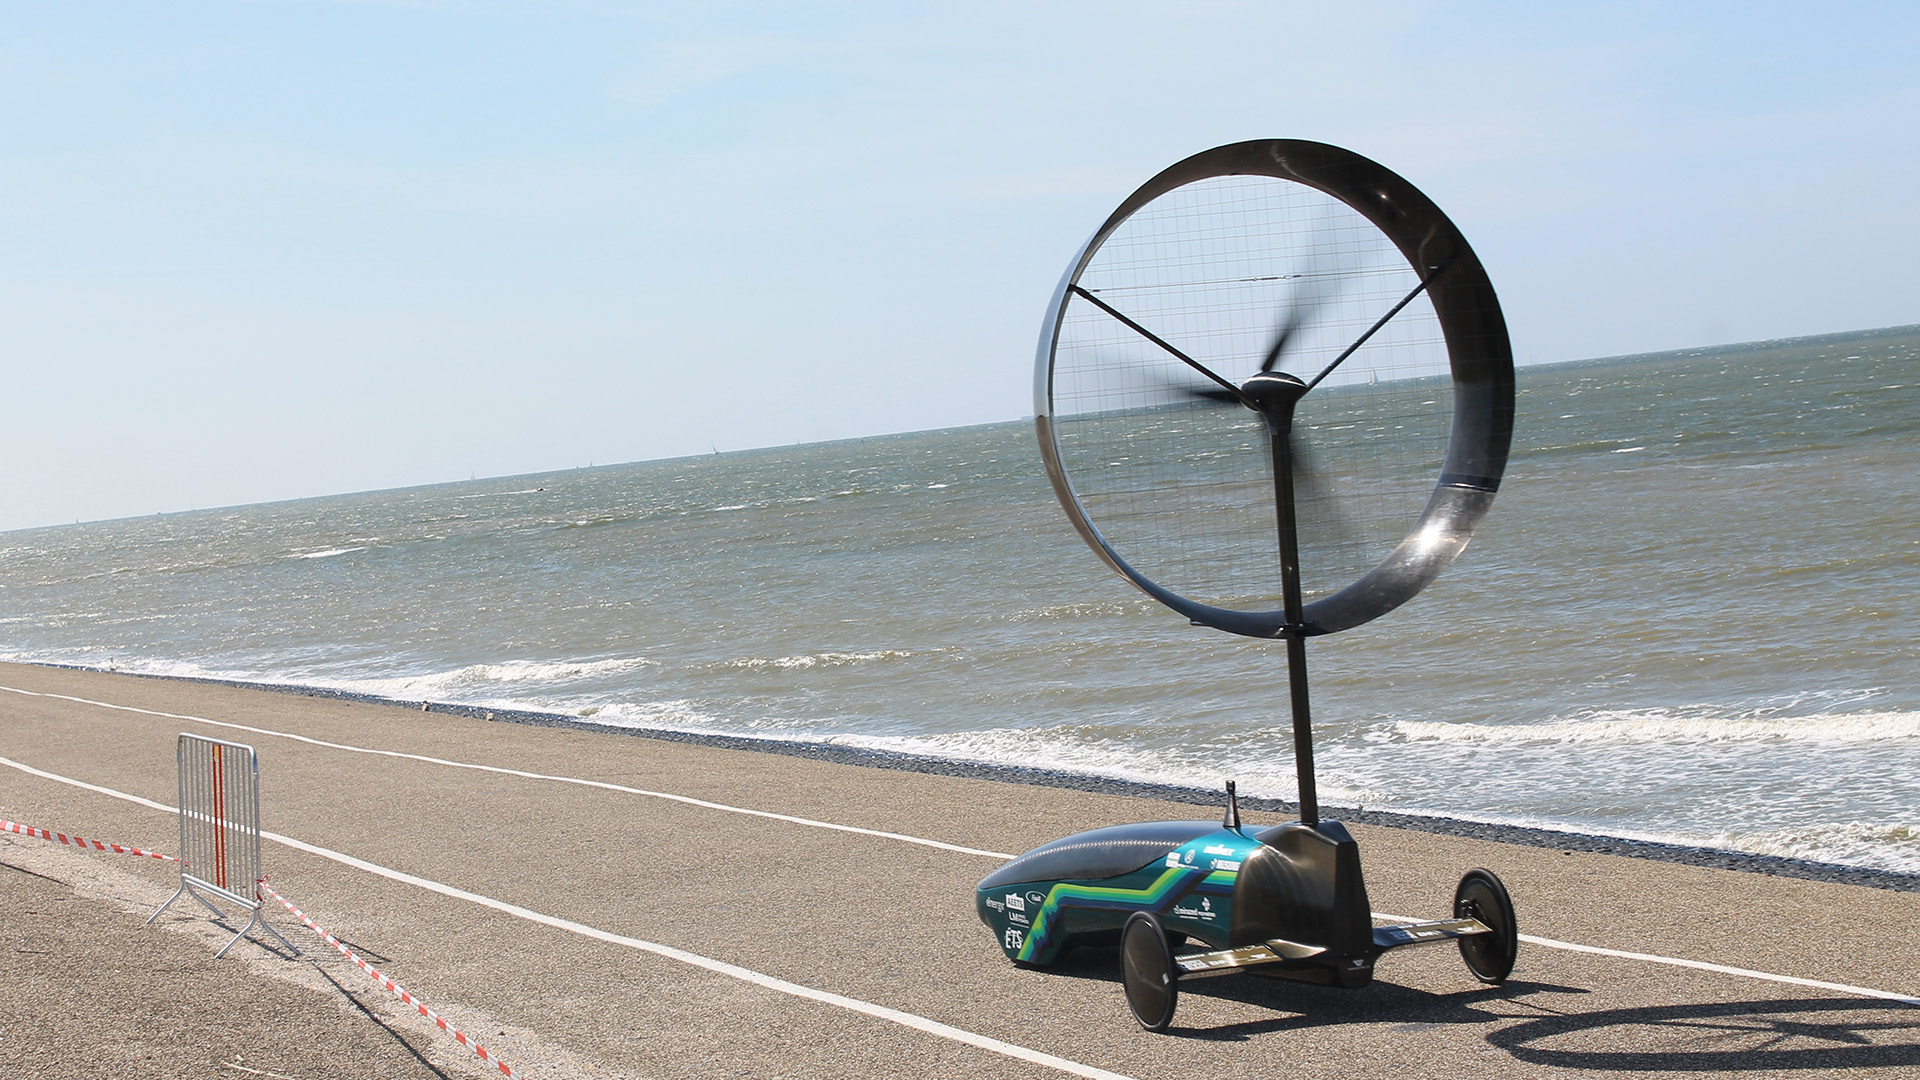 The wind-powered car designed by the Chinook engineering team drives by water